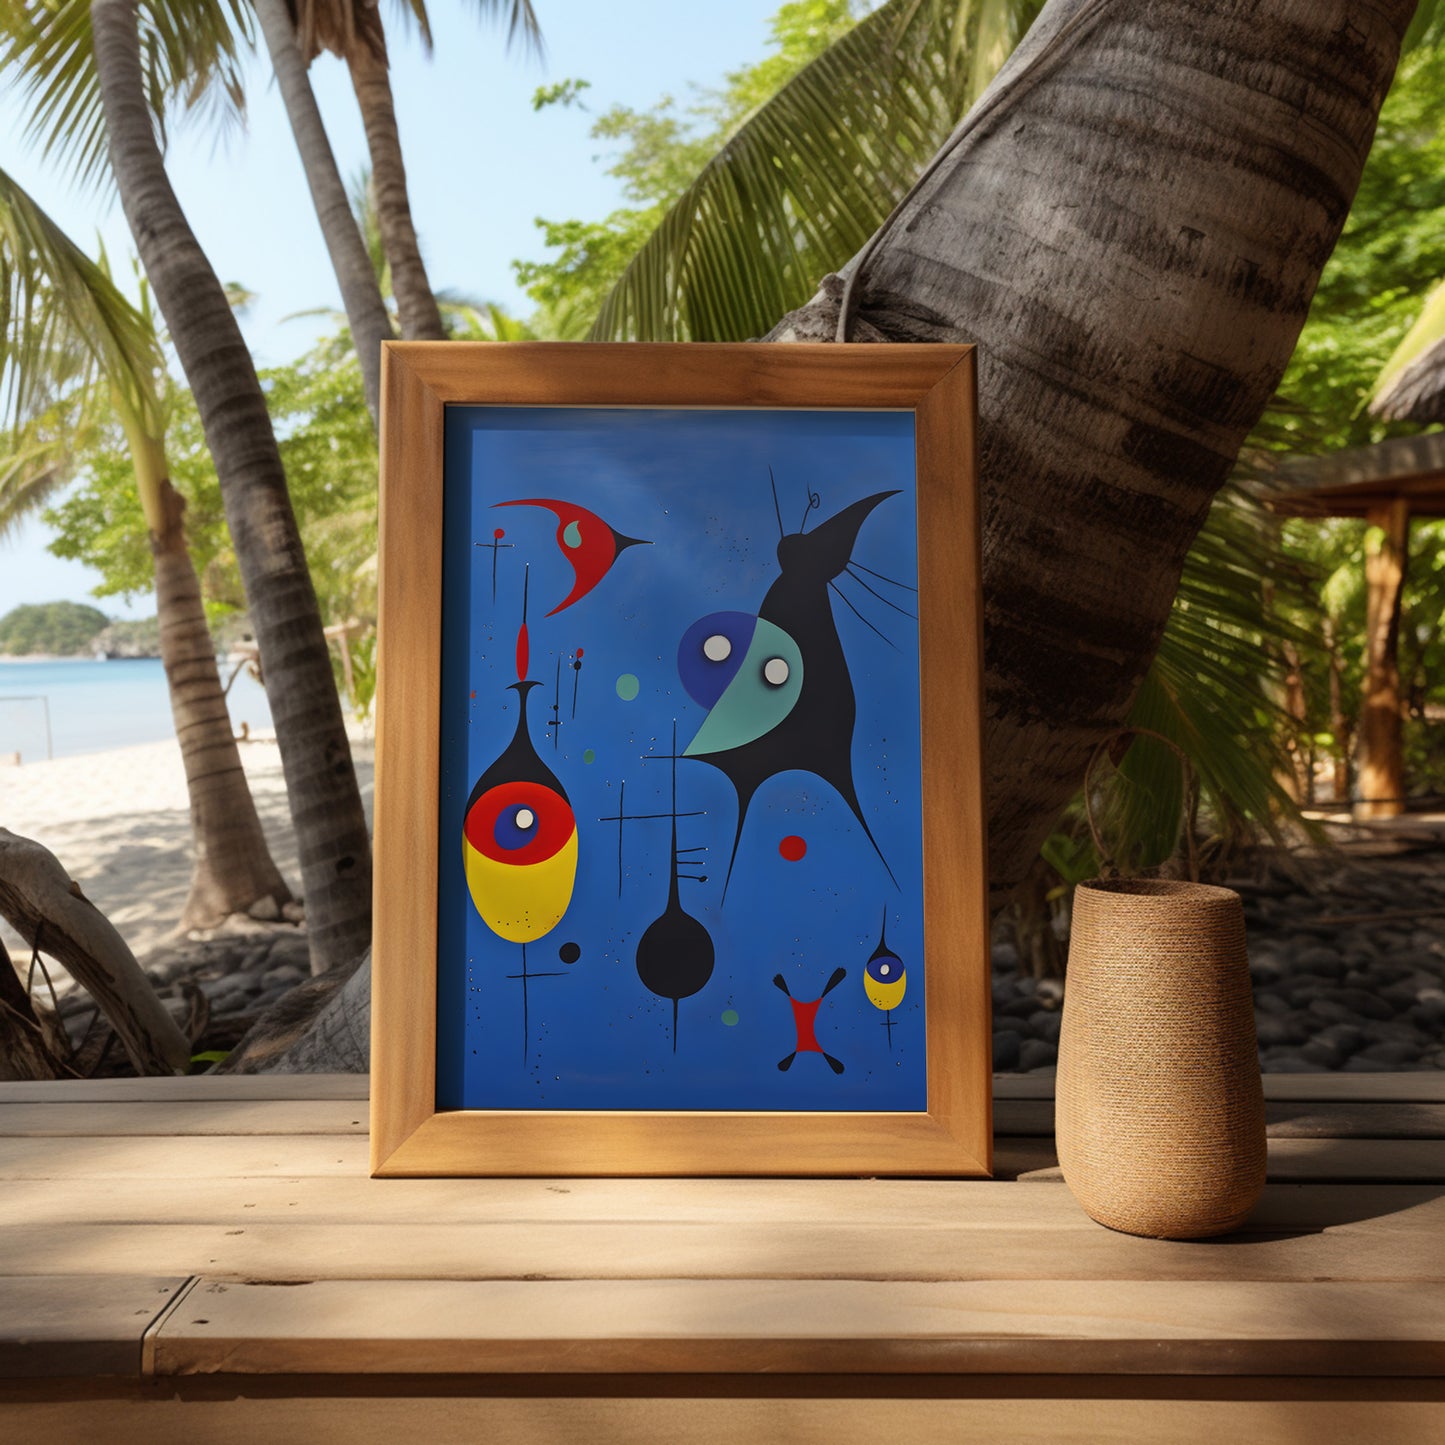 Abstract art in a frame on a beachside wooden table near a palm tree.